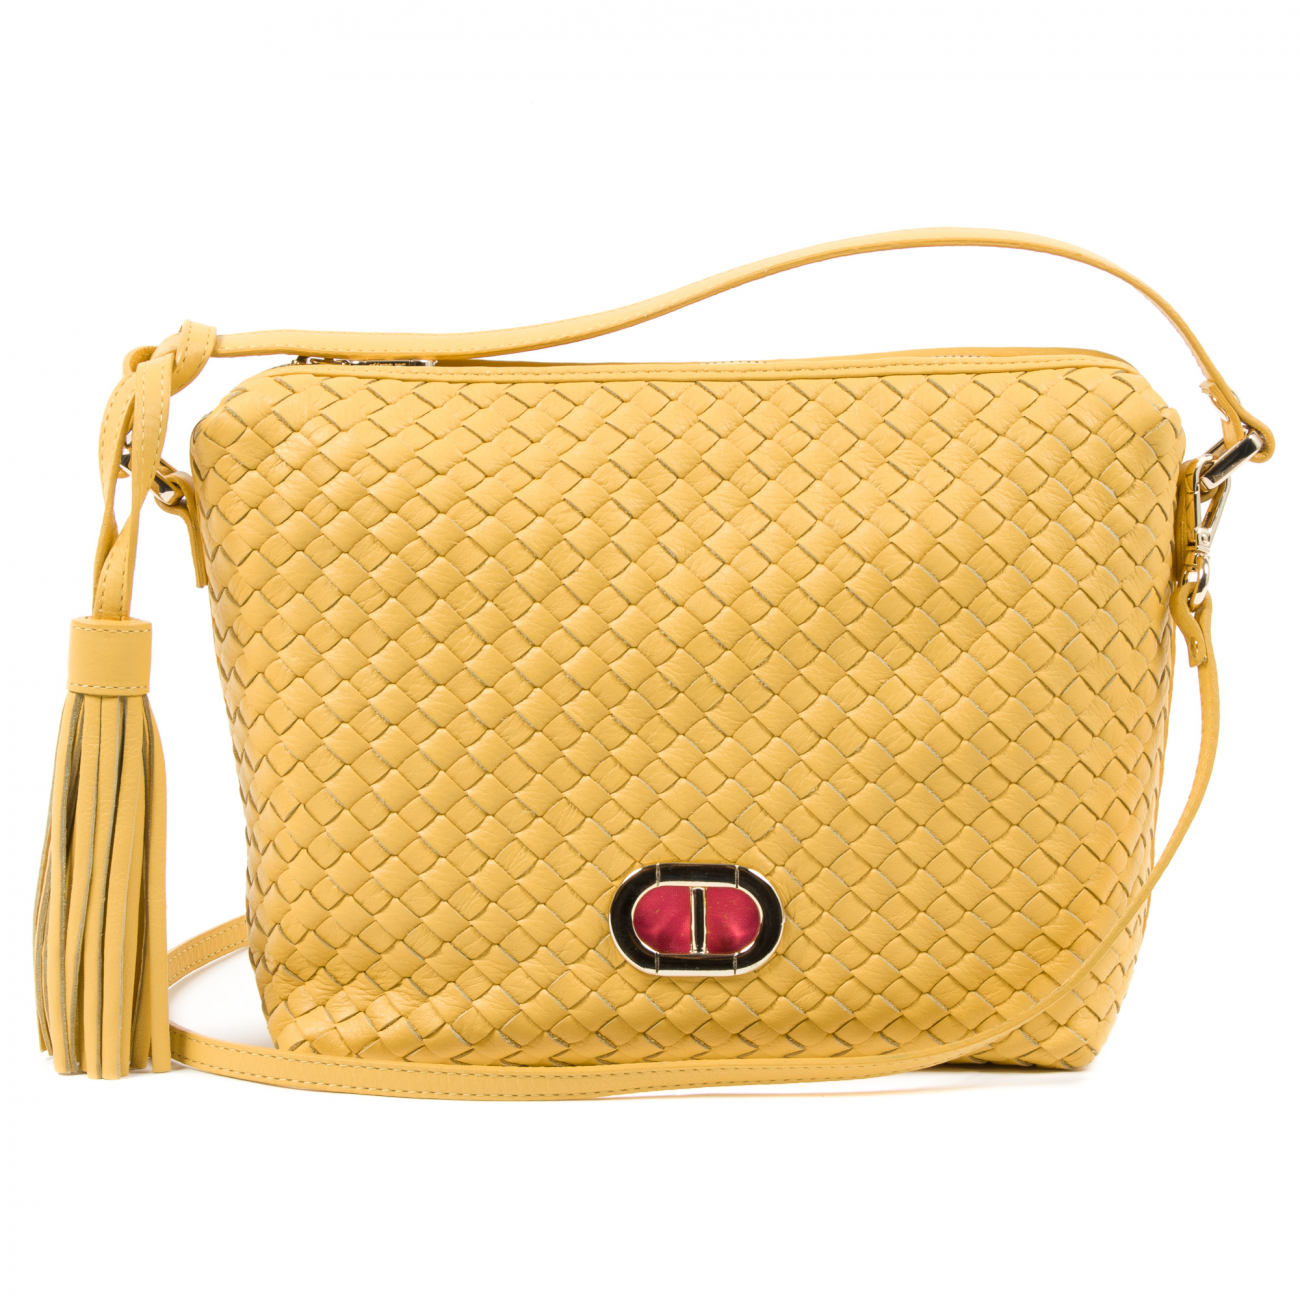 Details: GM1792 INTRECCIO MIAMI MAIS - Color: Yellow - Composition: 100% LEATHER - Made: ITALY - Measures (Width-Height-Depth): 32x22x10 cm - Front Logo - Zip Closure - Logo Inside - One Inside Zip Pocket - Removable Shoulder Strap